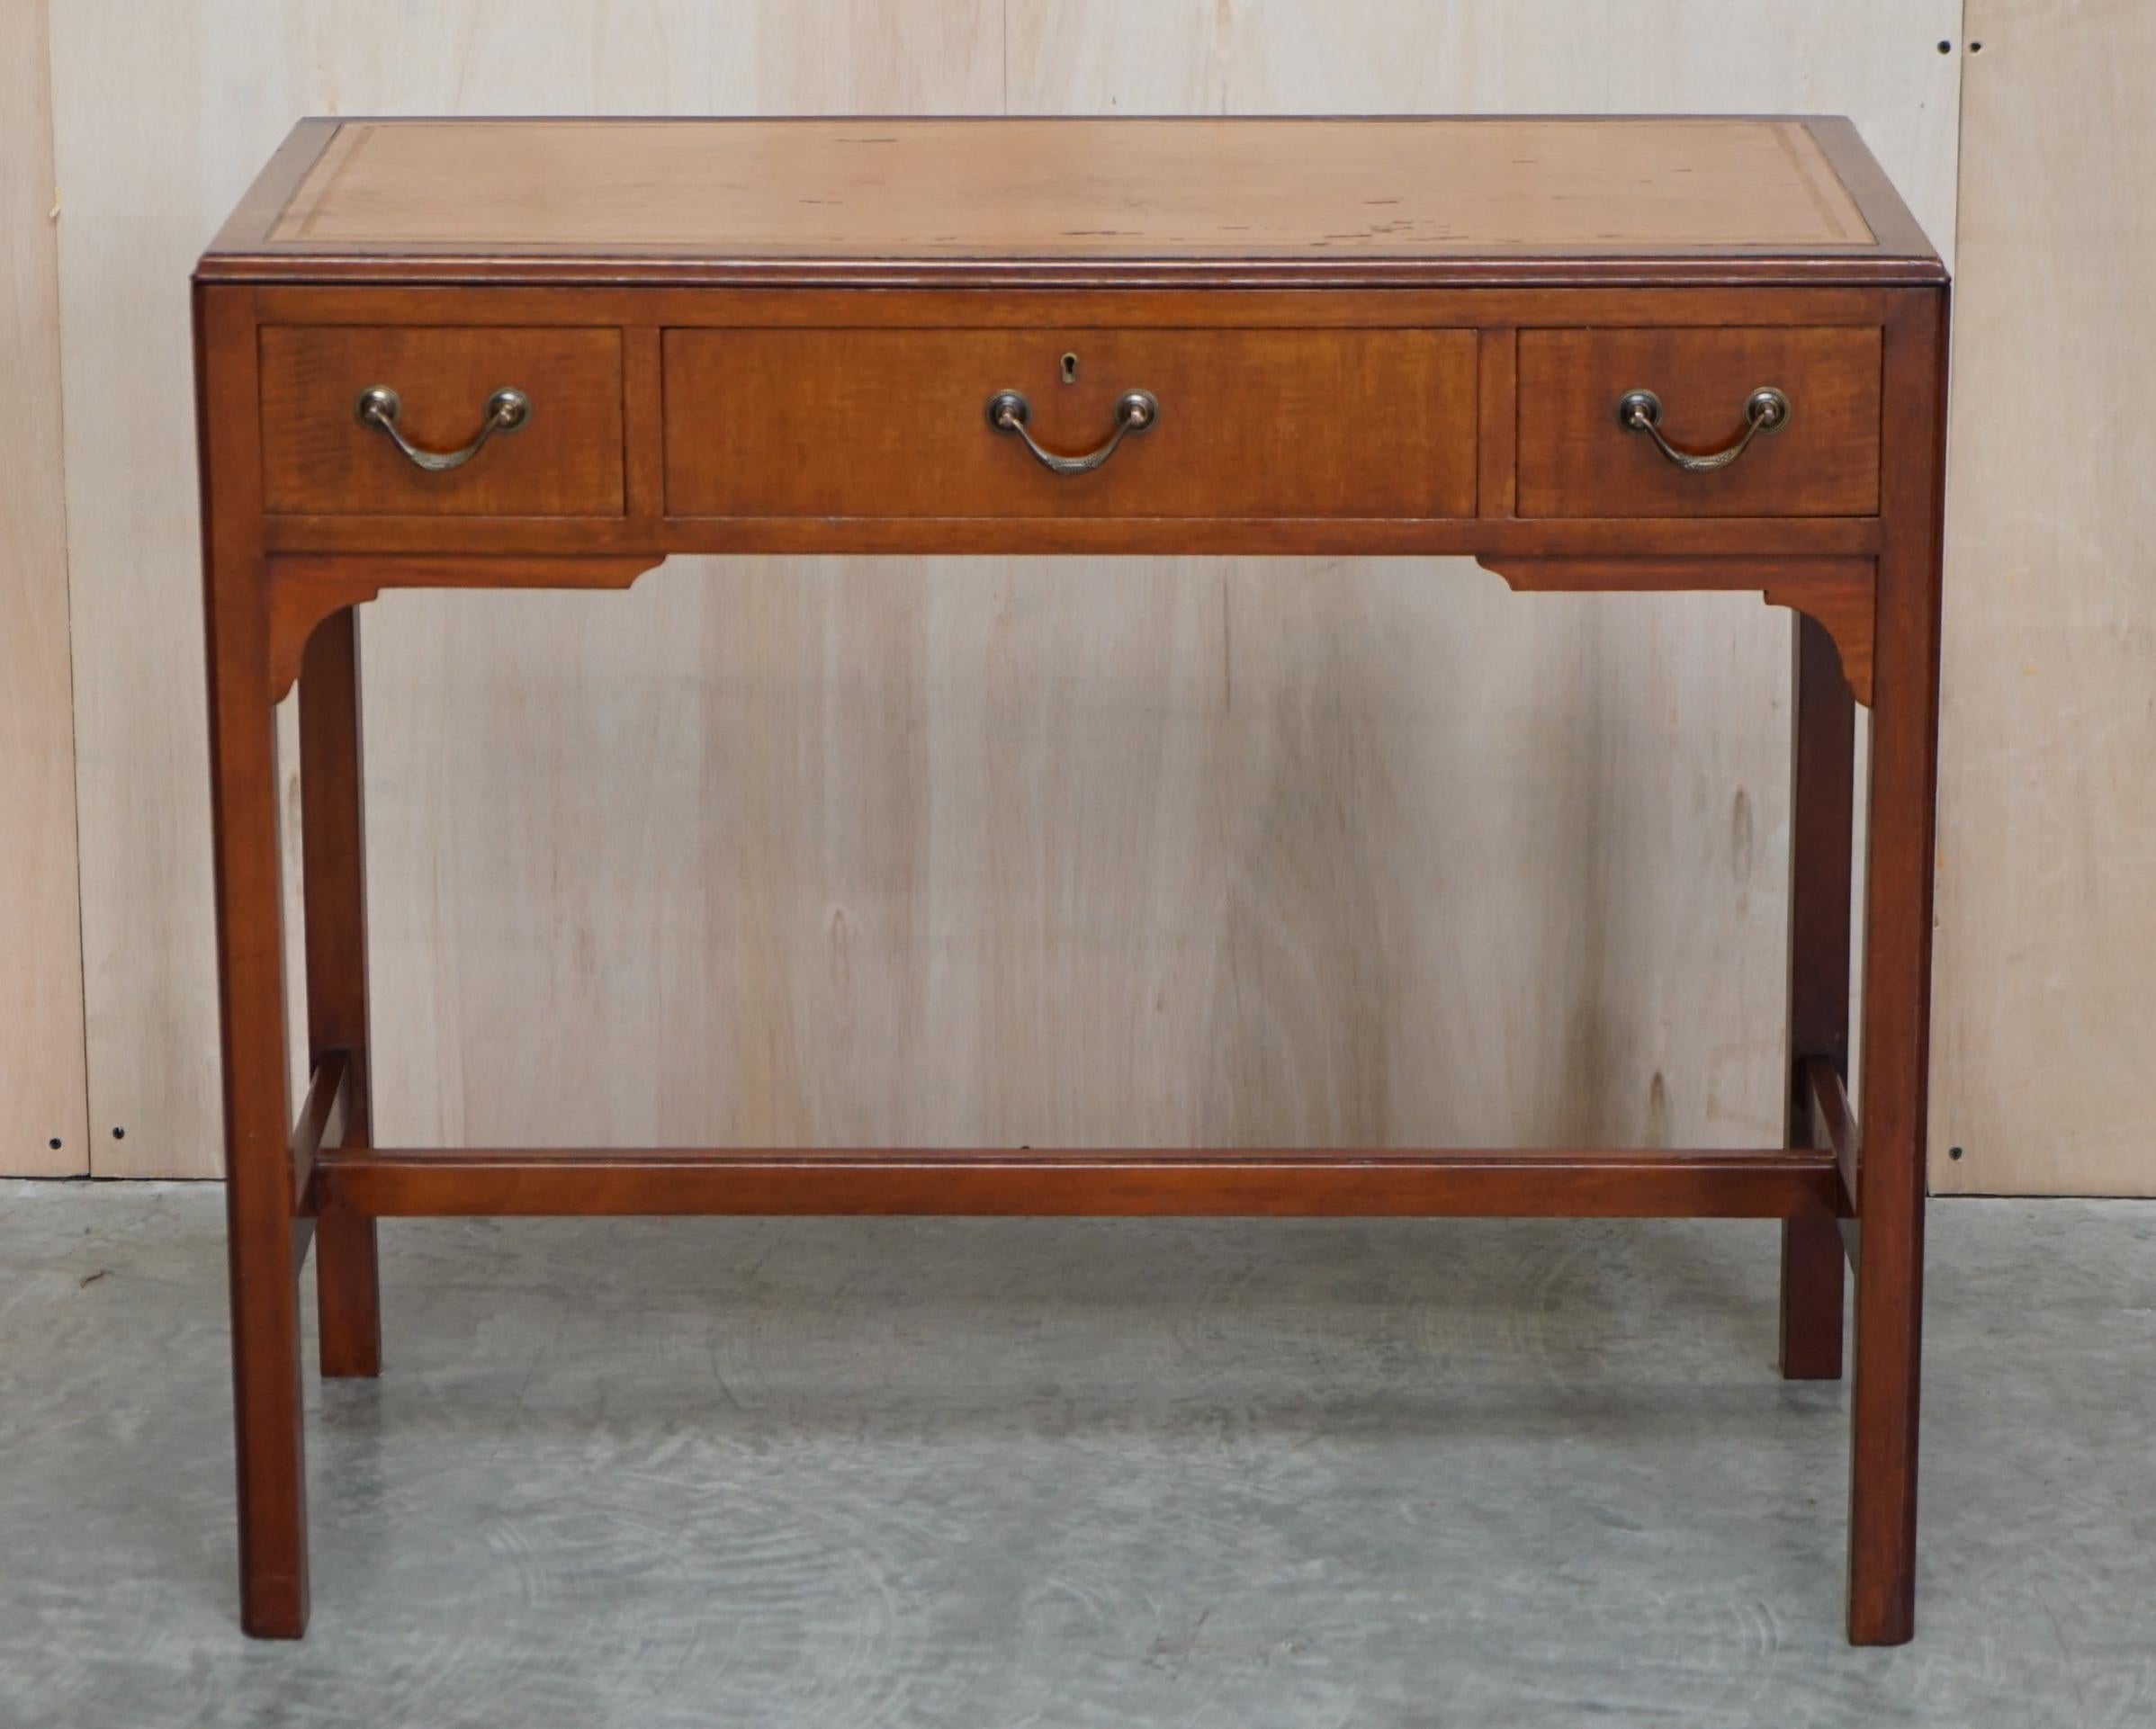 We are delighted to offer for sale this lovely circa 1880-1900 Watchmakers desk in the Georgian taste with period brown leather top and sorting drawer.

A good looking and well made small desk or writing table, it was sold to me as a watchmakers